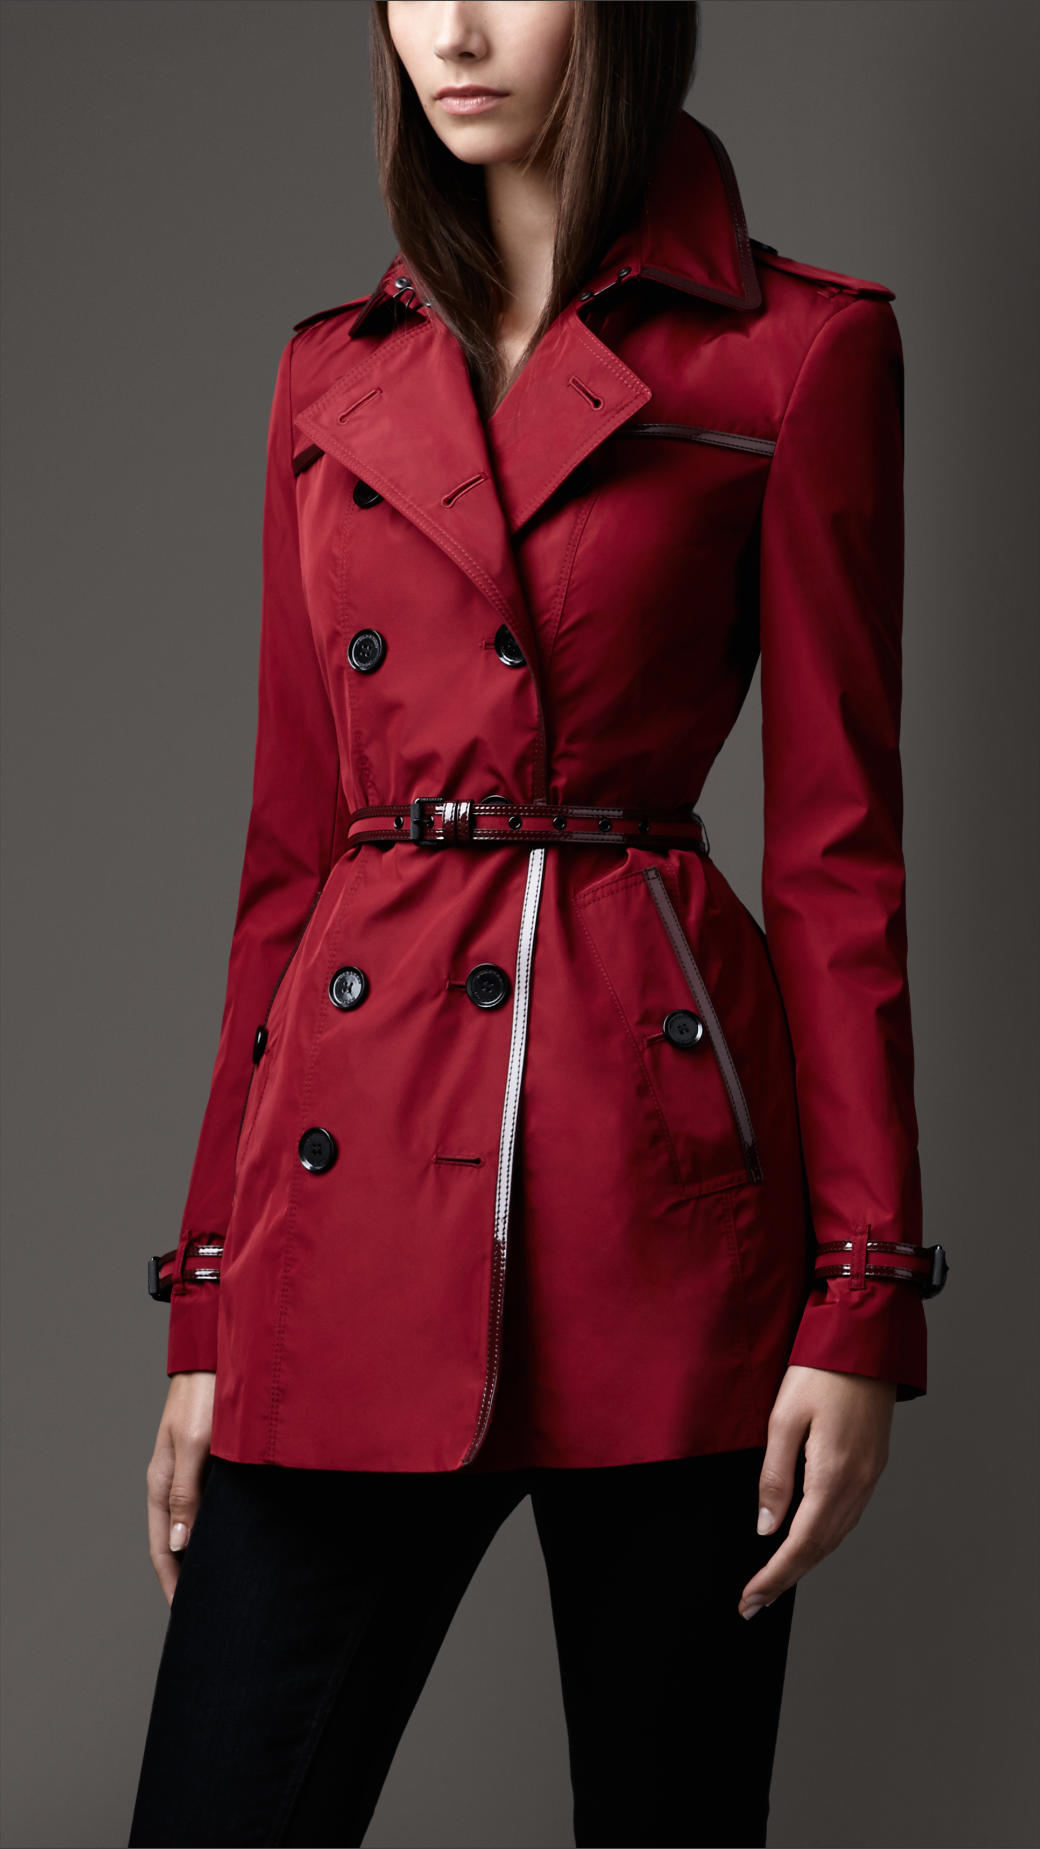 Burberry Short Slim Fit Patent Trim Trench Coat in Red | Lyst